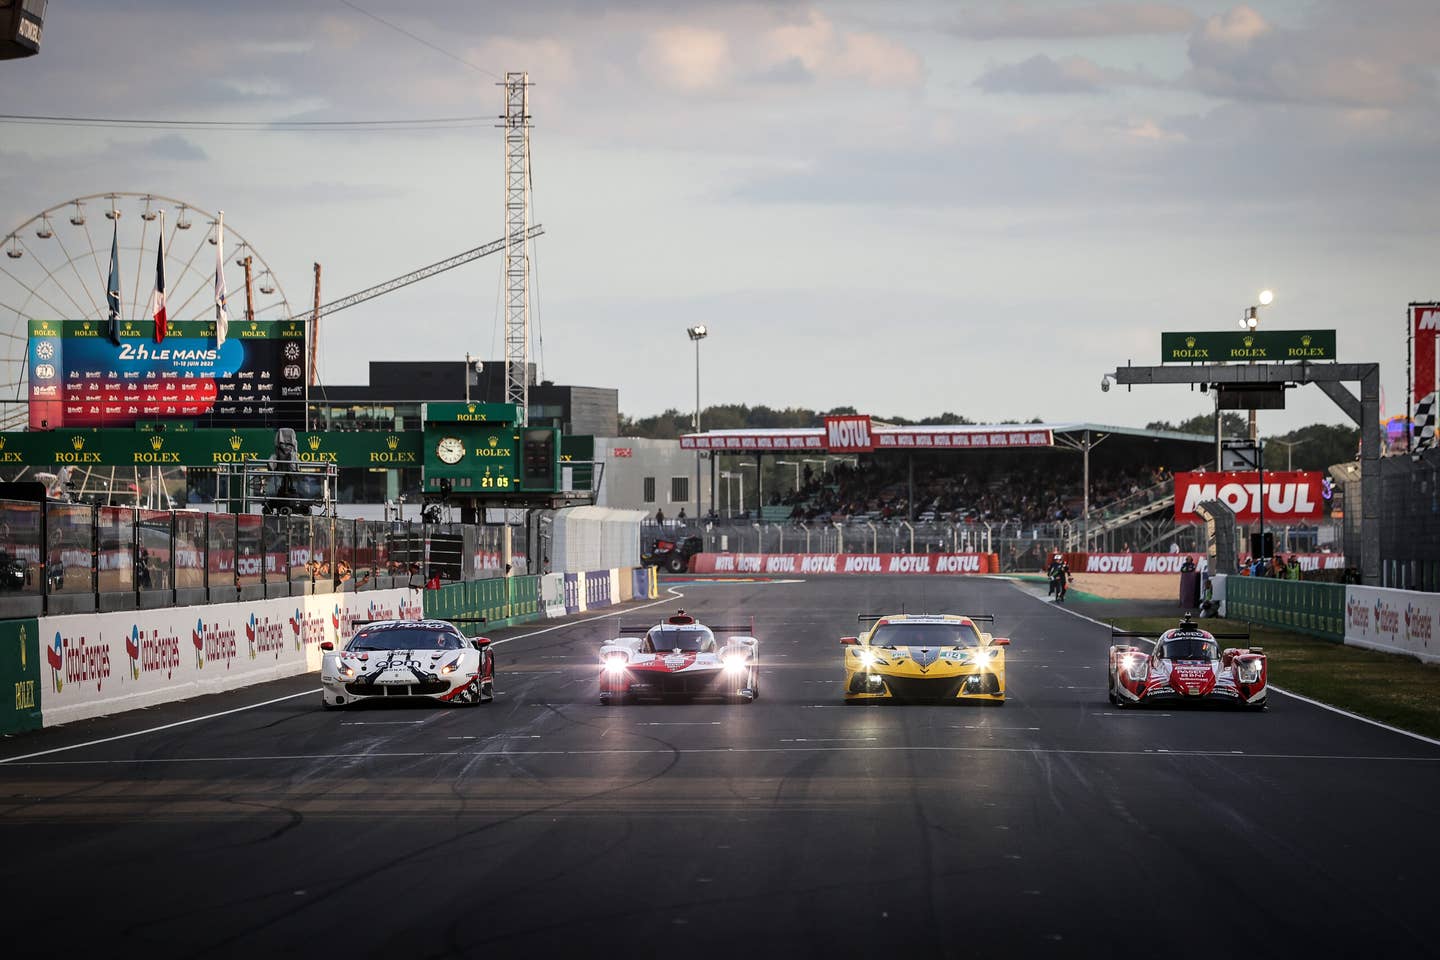 LE MANS, FRANCE - JUNE 9: Hyperpole winners (L to R): Vincent Abril of France and #61 AF Corse Ferrari 488 GTE Evo - LM GTE AM; Brendon Hartley of New Zealand and #08 Toyota Racing, Toyota GR010, Hybrid - Hypercar; Nick Tandy of Great Britain and #64 Corvette Racing - Chevrolet Corvette C8.R - LM GTE Pro; Robin Frijns of The Netherlands and #31 WRT Oreca 07 - Gibson - LMP2, at Le Mans 24 Hours practice and qualifying on June 9, 2022 in Le Mans, France. (Photo by James Moy Photography/Getty Images)